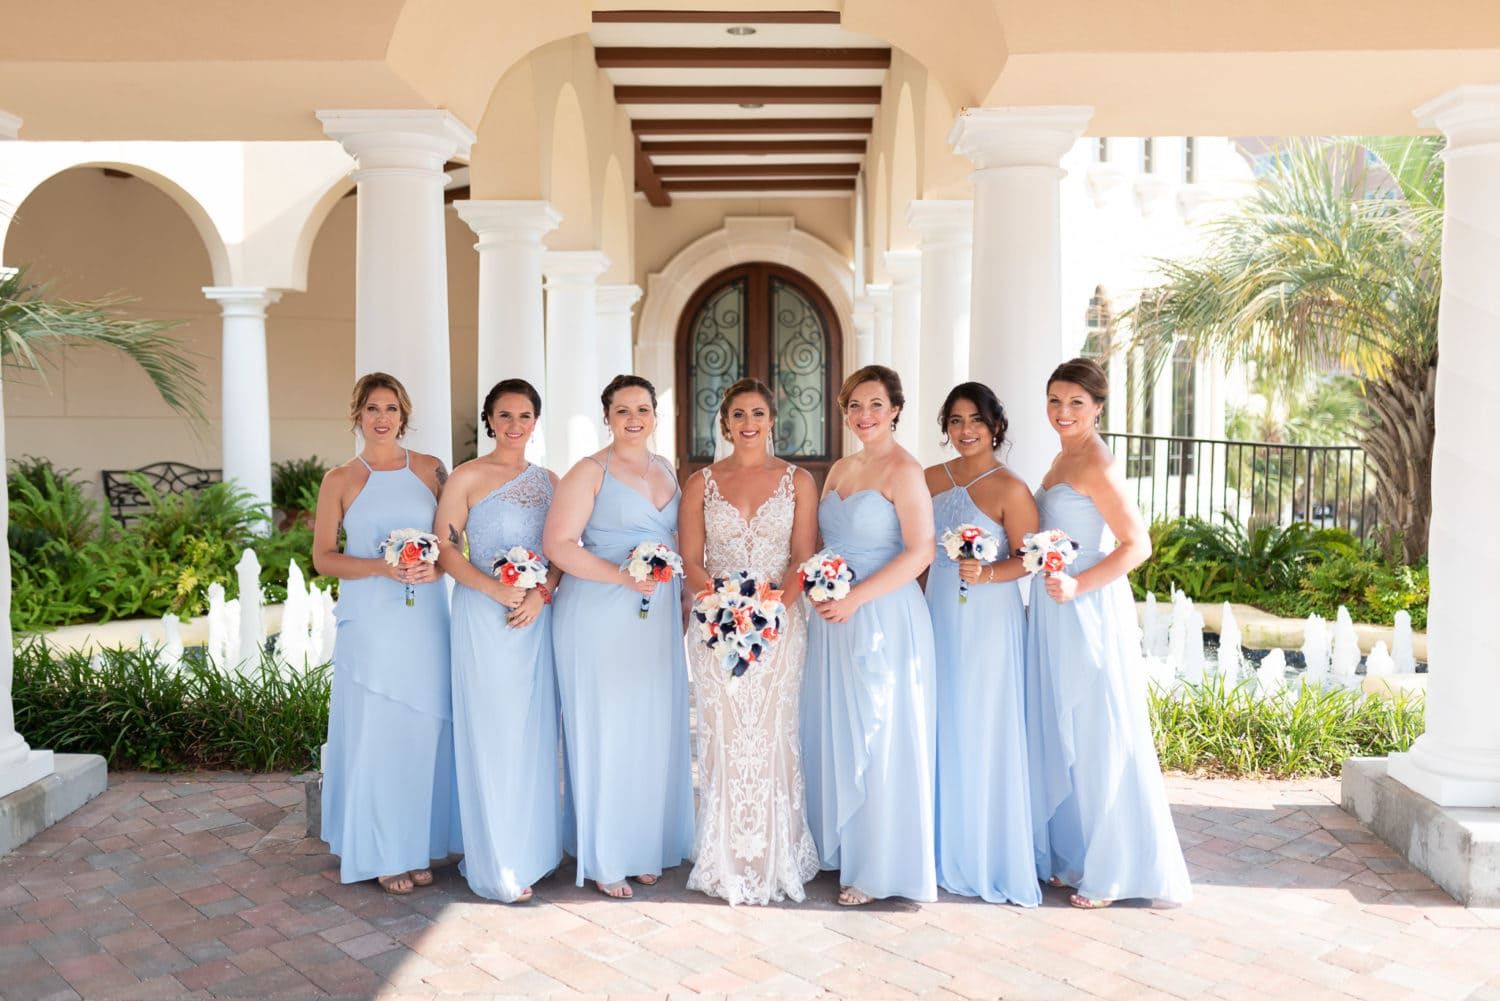 Bridal party pictures by the front columns Grande Dunes Ocean Club - Myrtle Beach